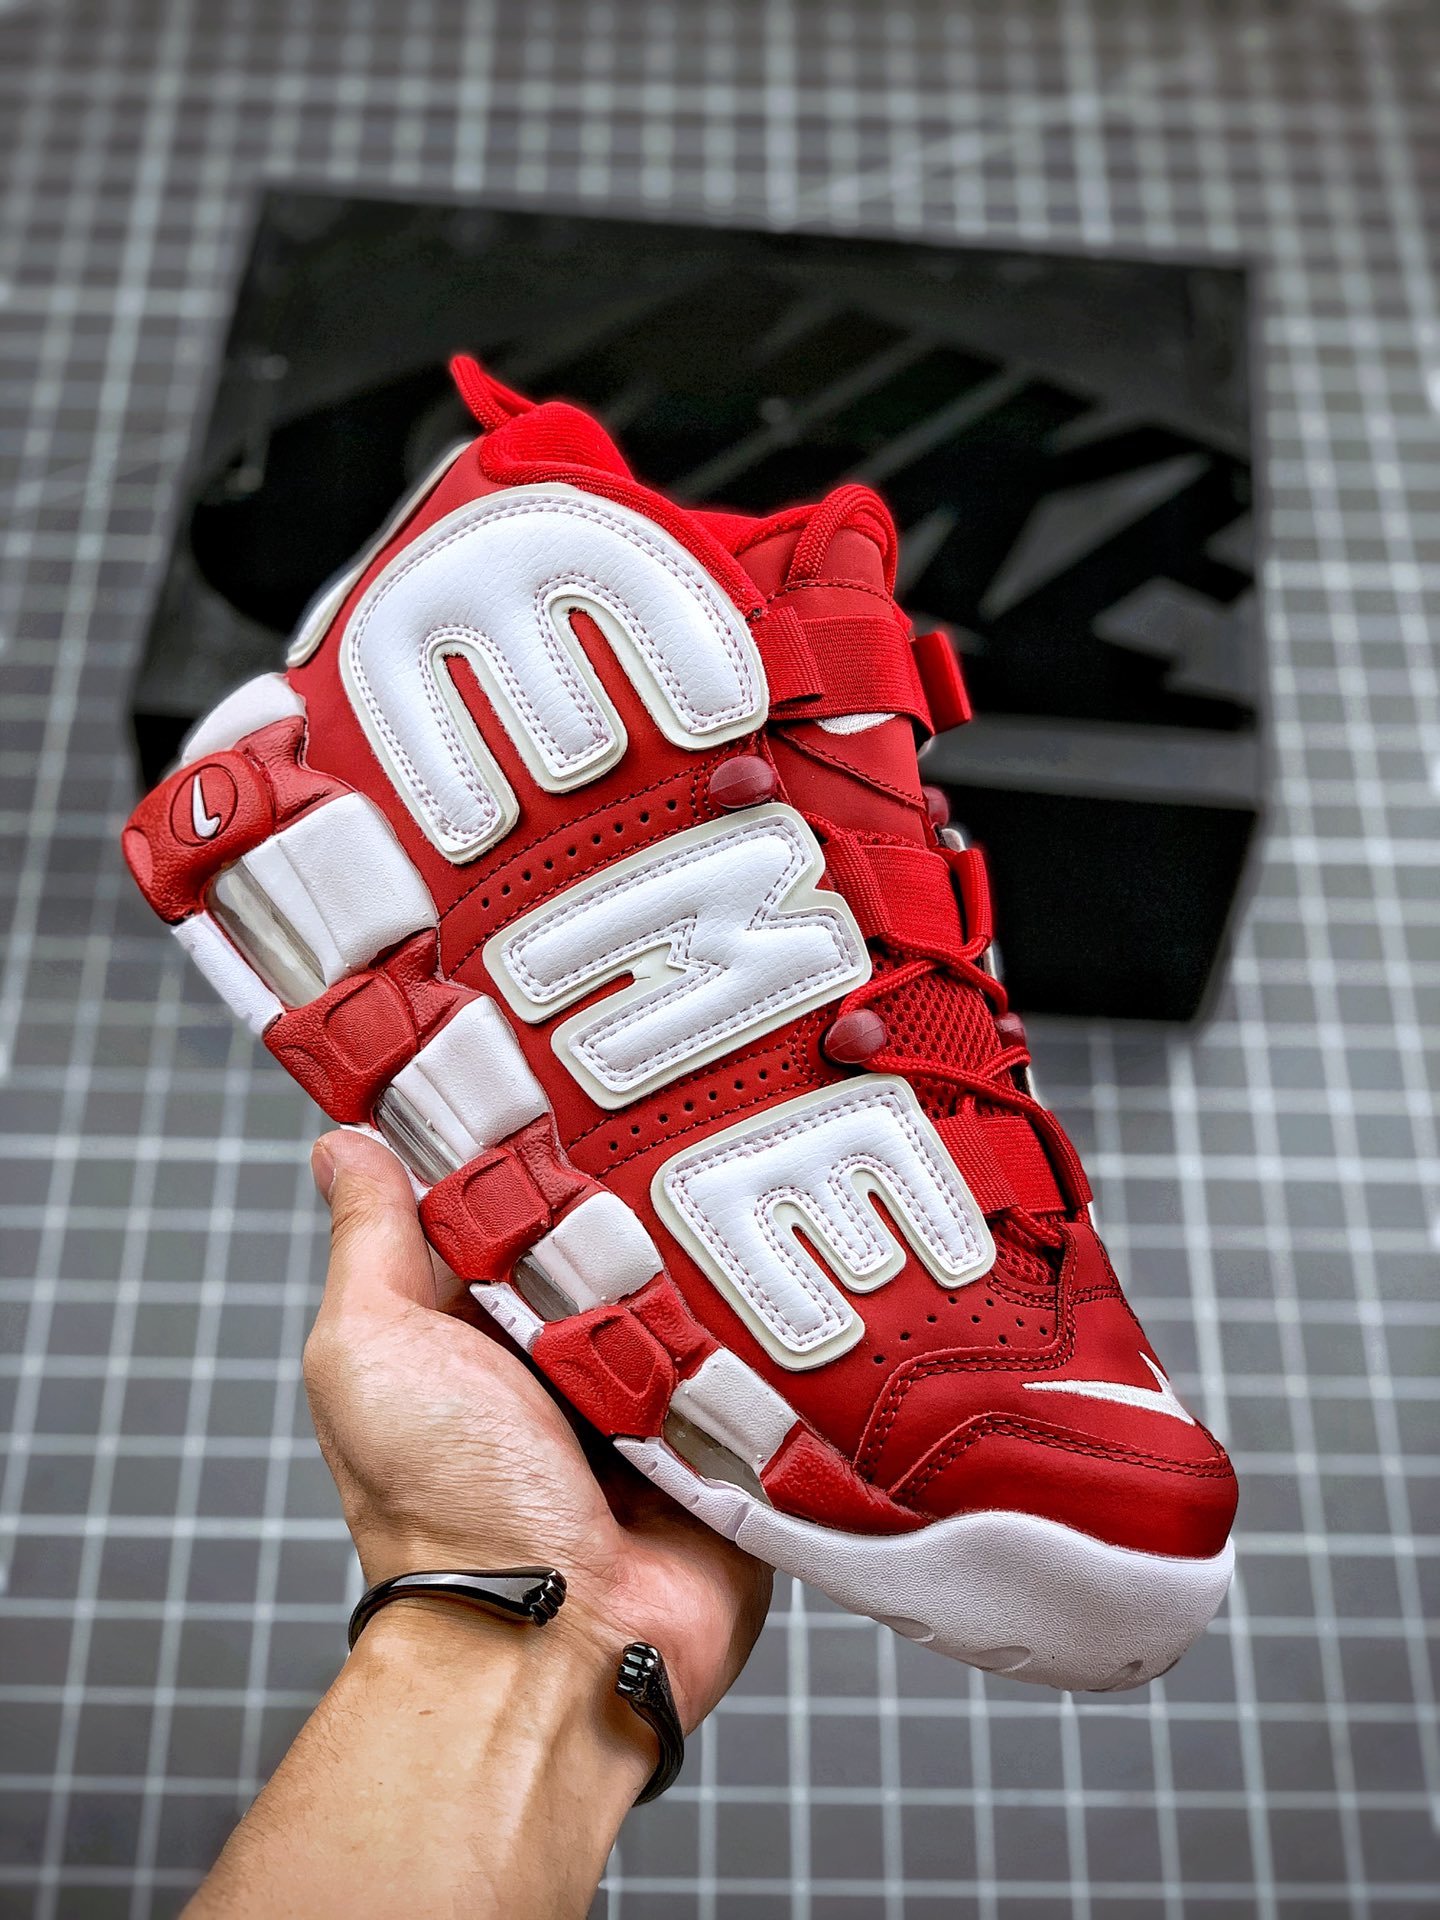 Supreme x Nike Air More Uptempo Suptempo Red Shoes